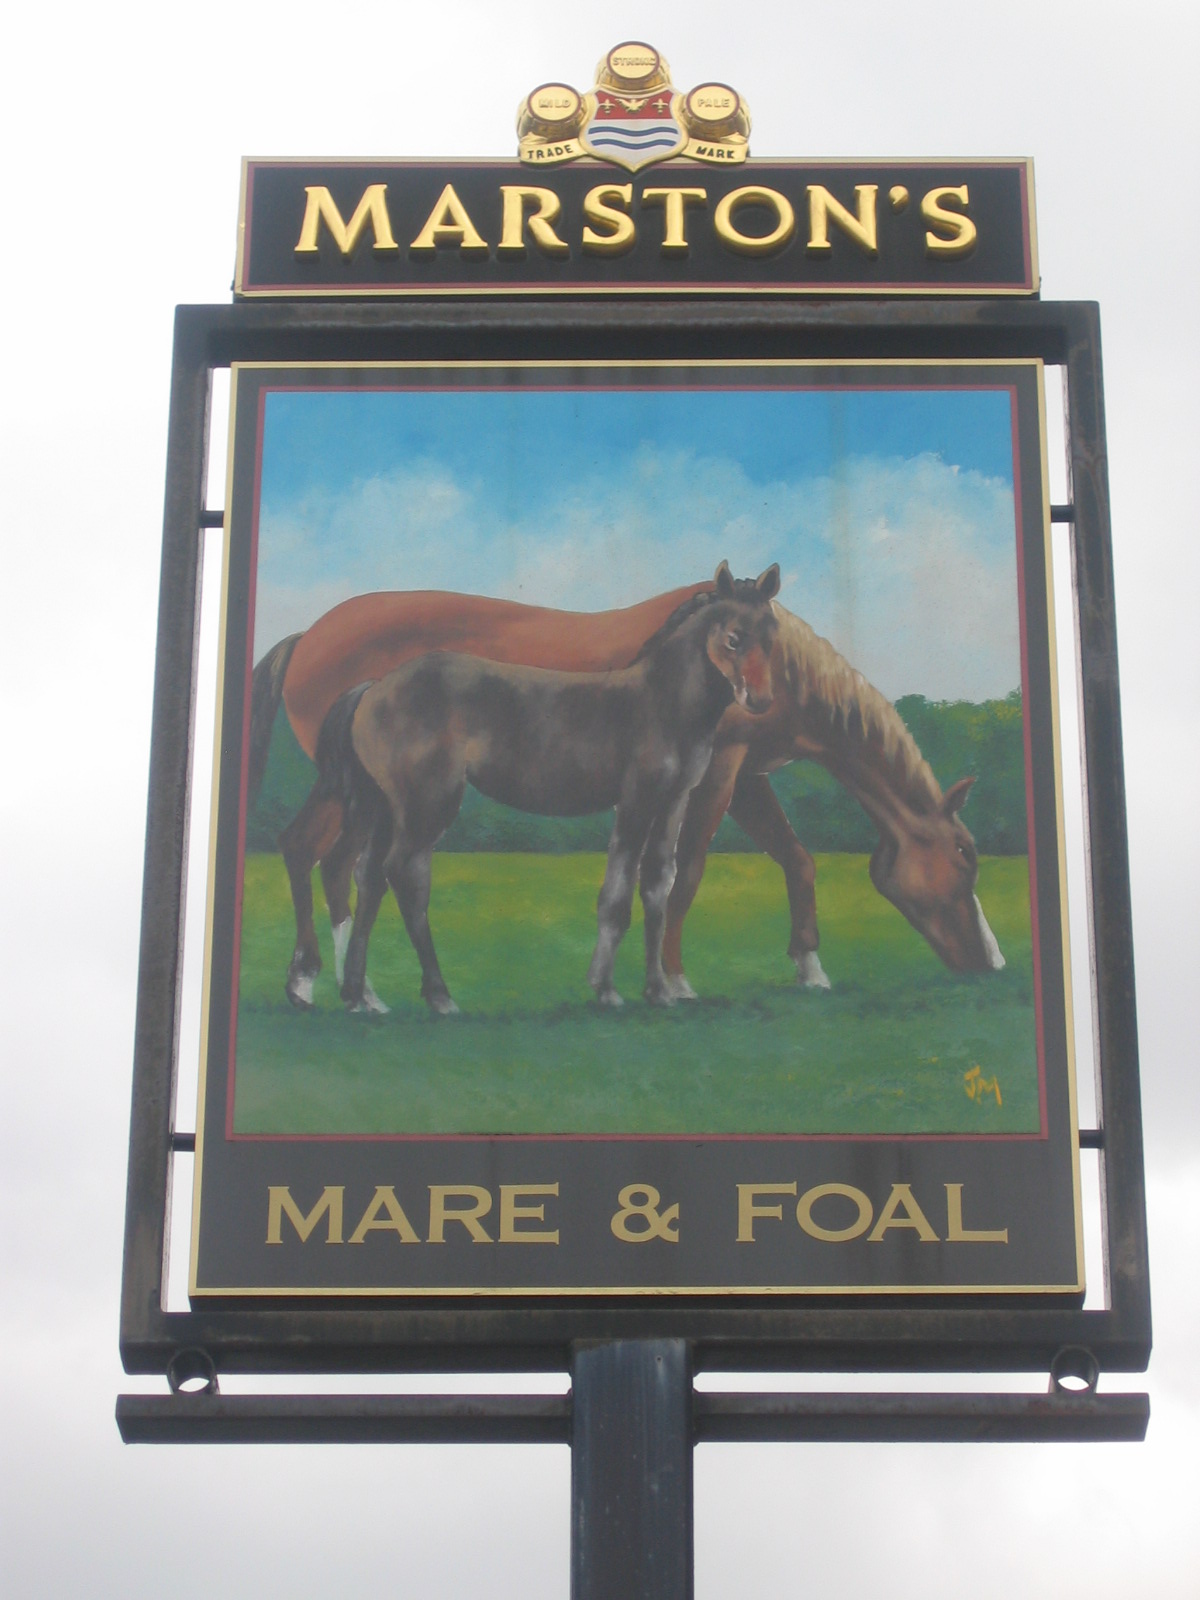 Pub sign Photo study - The Mare and Foal, Failsworth, Manchester - taken by me 